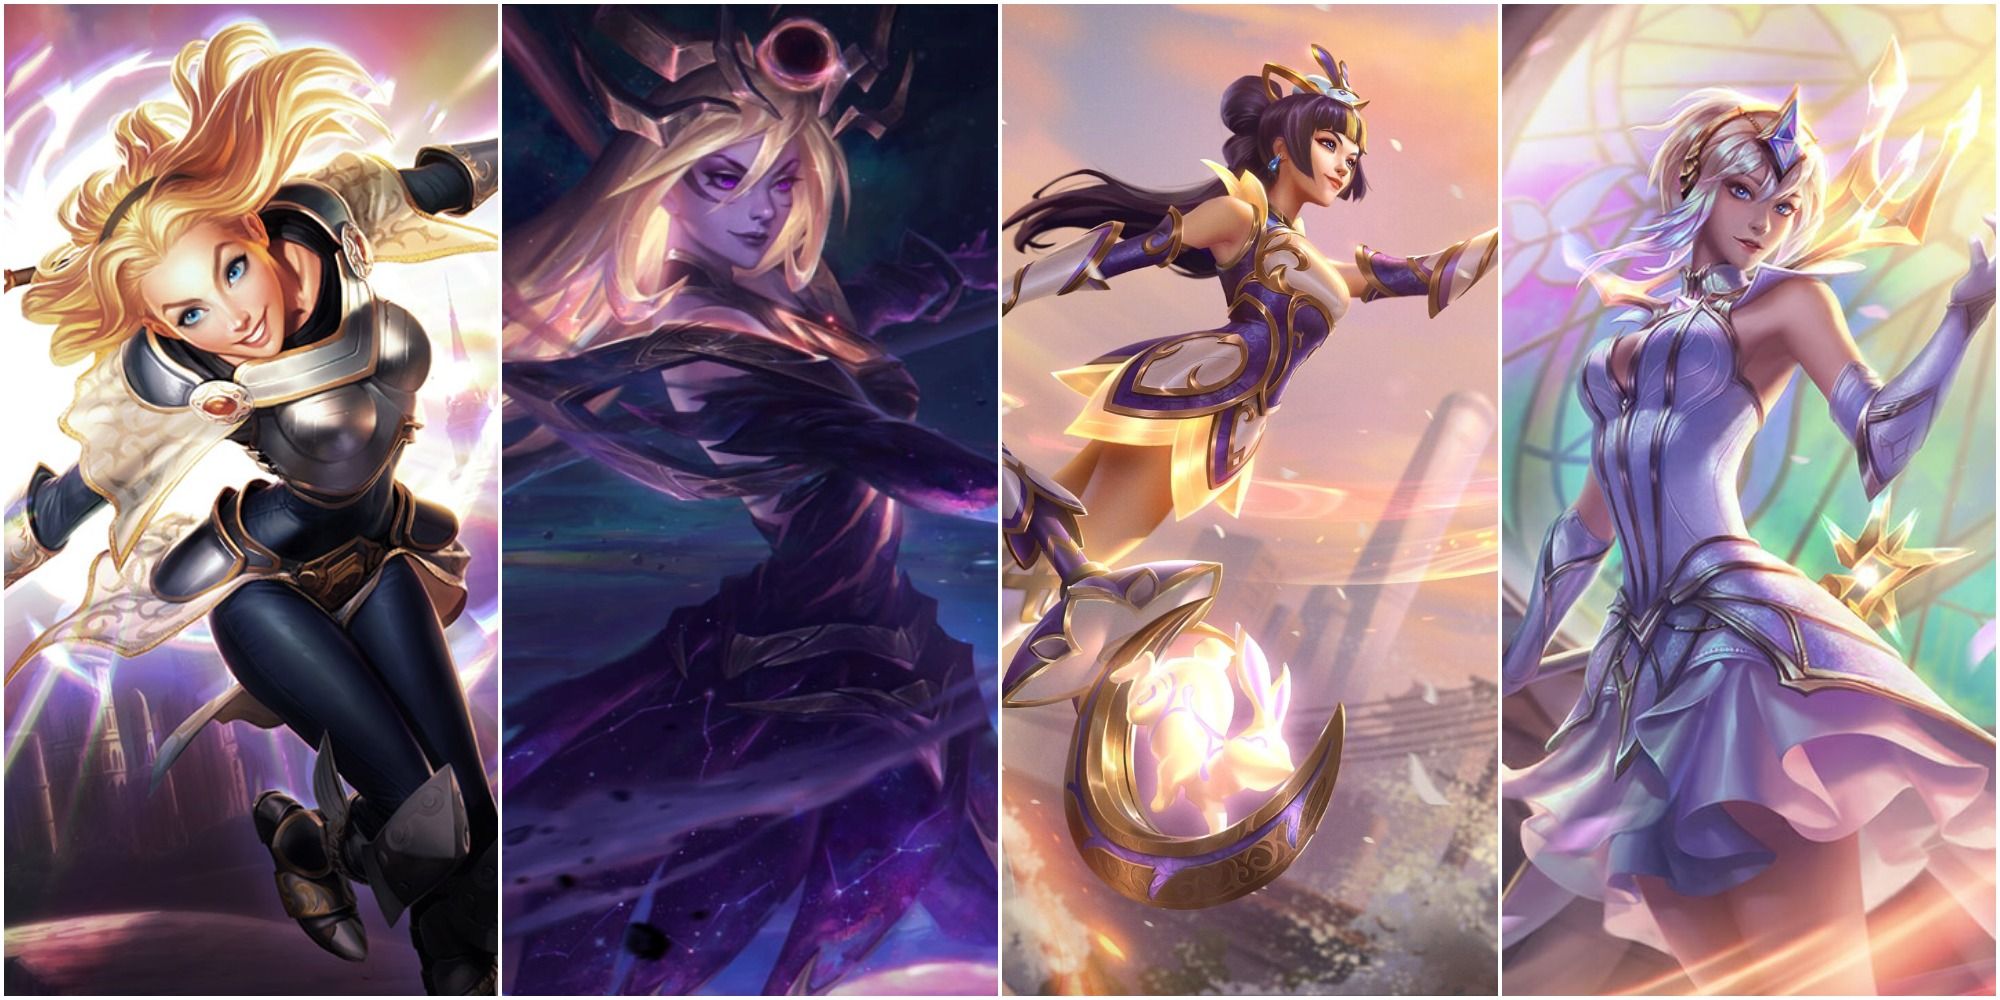 An Image Show The League Of Legends Champion Lux And Three Of Her Alternate Skins